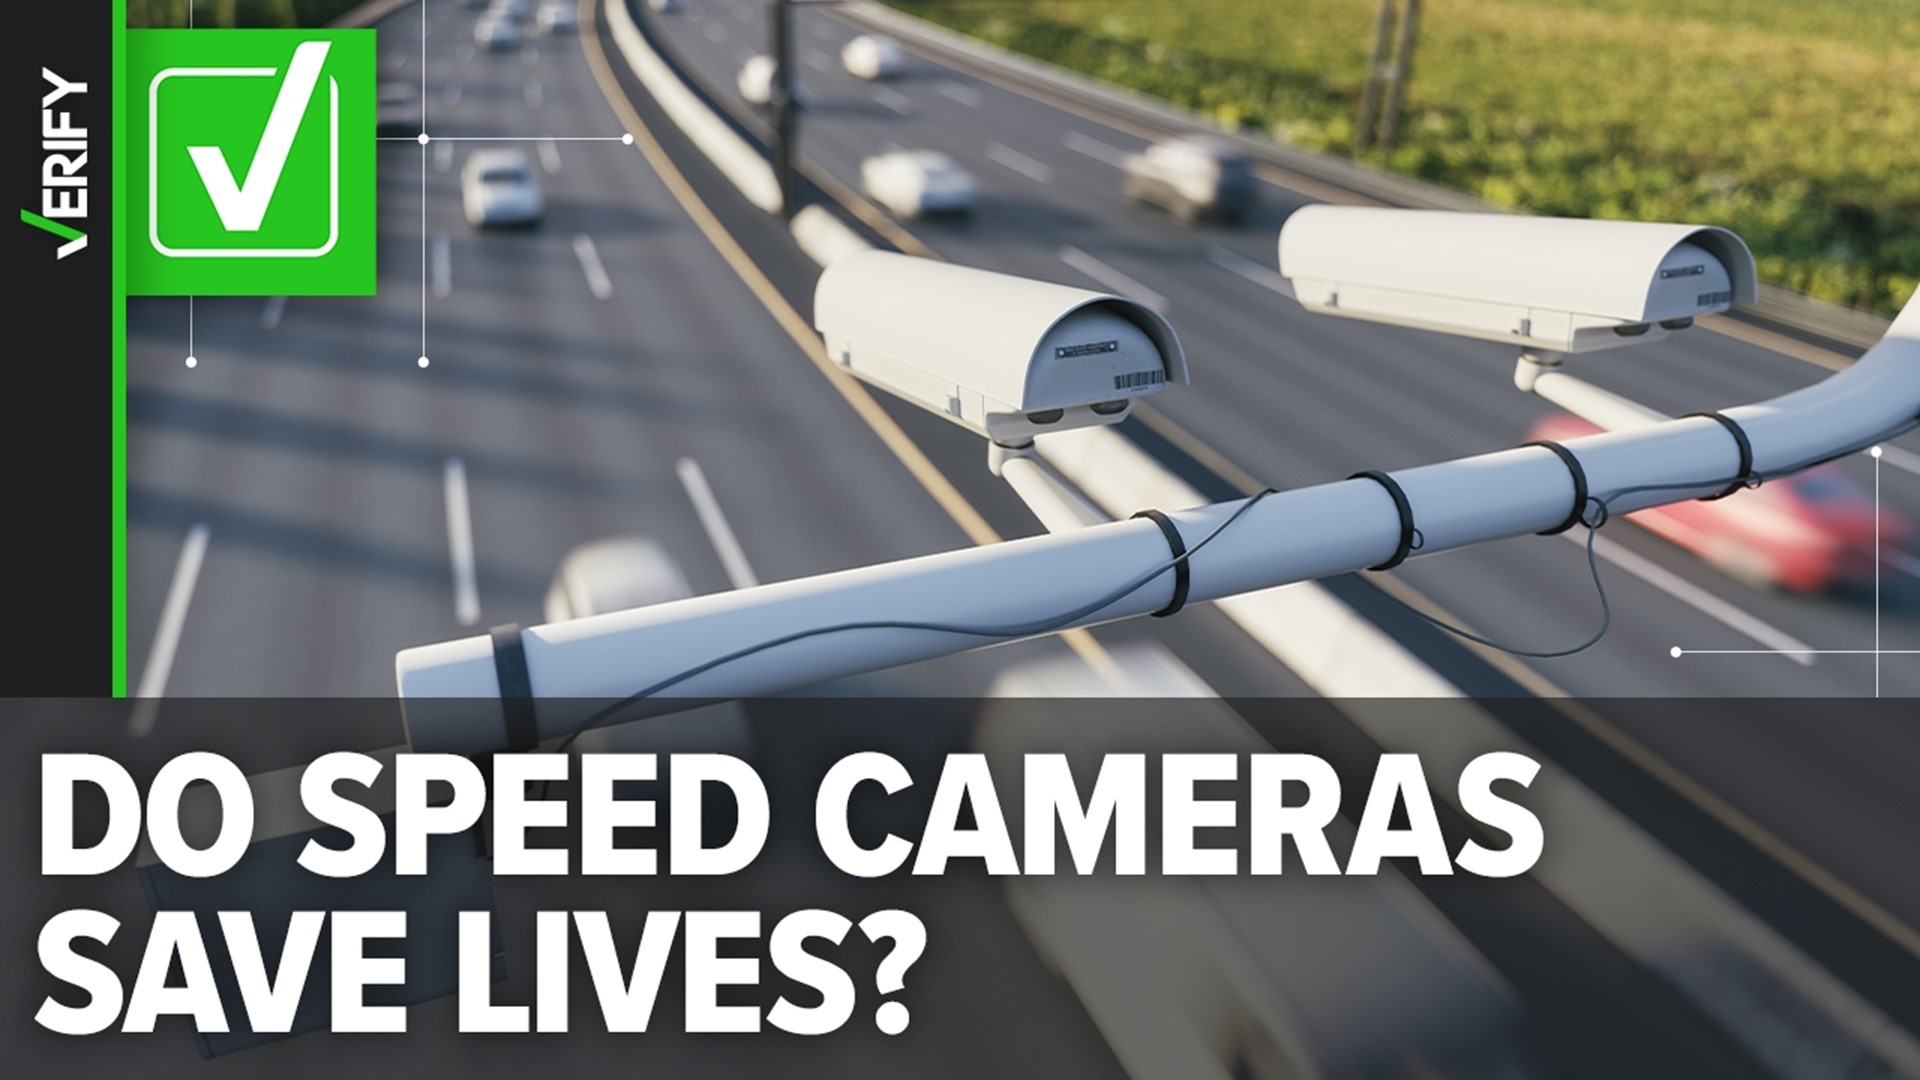 Speed safety cameras take pictures of speeding cars’ license plates and then send tickets in the mail. Studies show they reduce crashes.